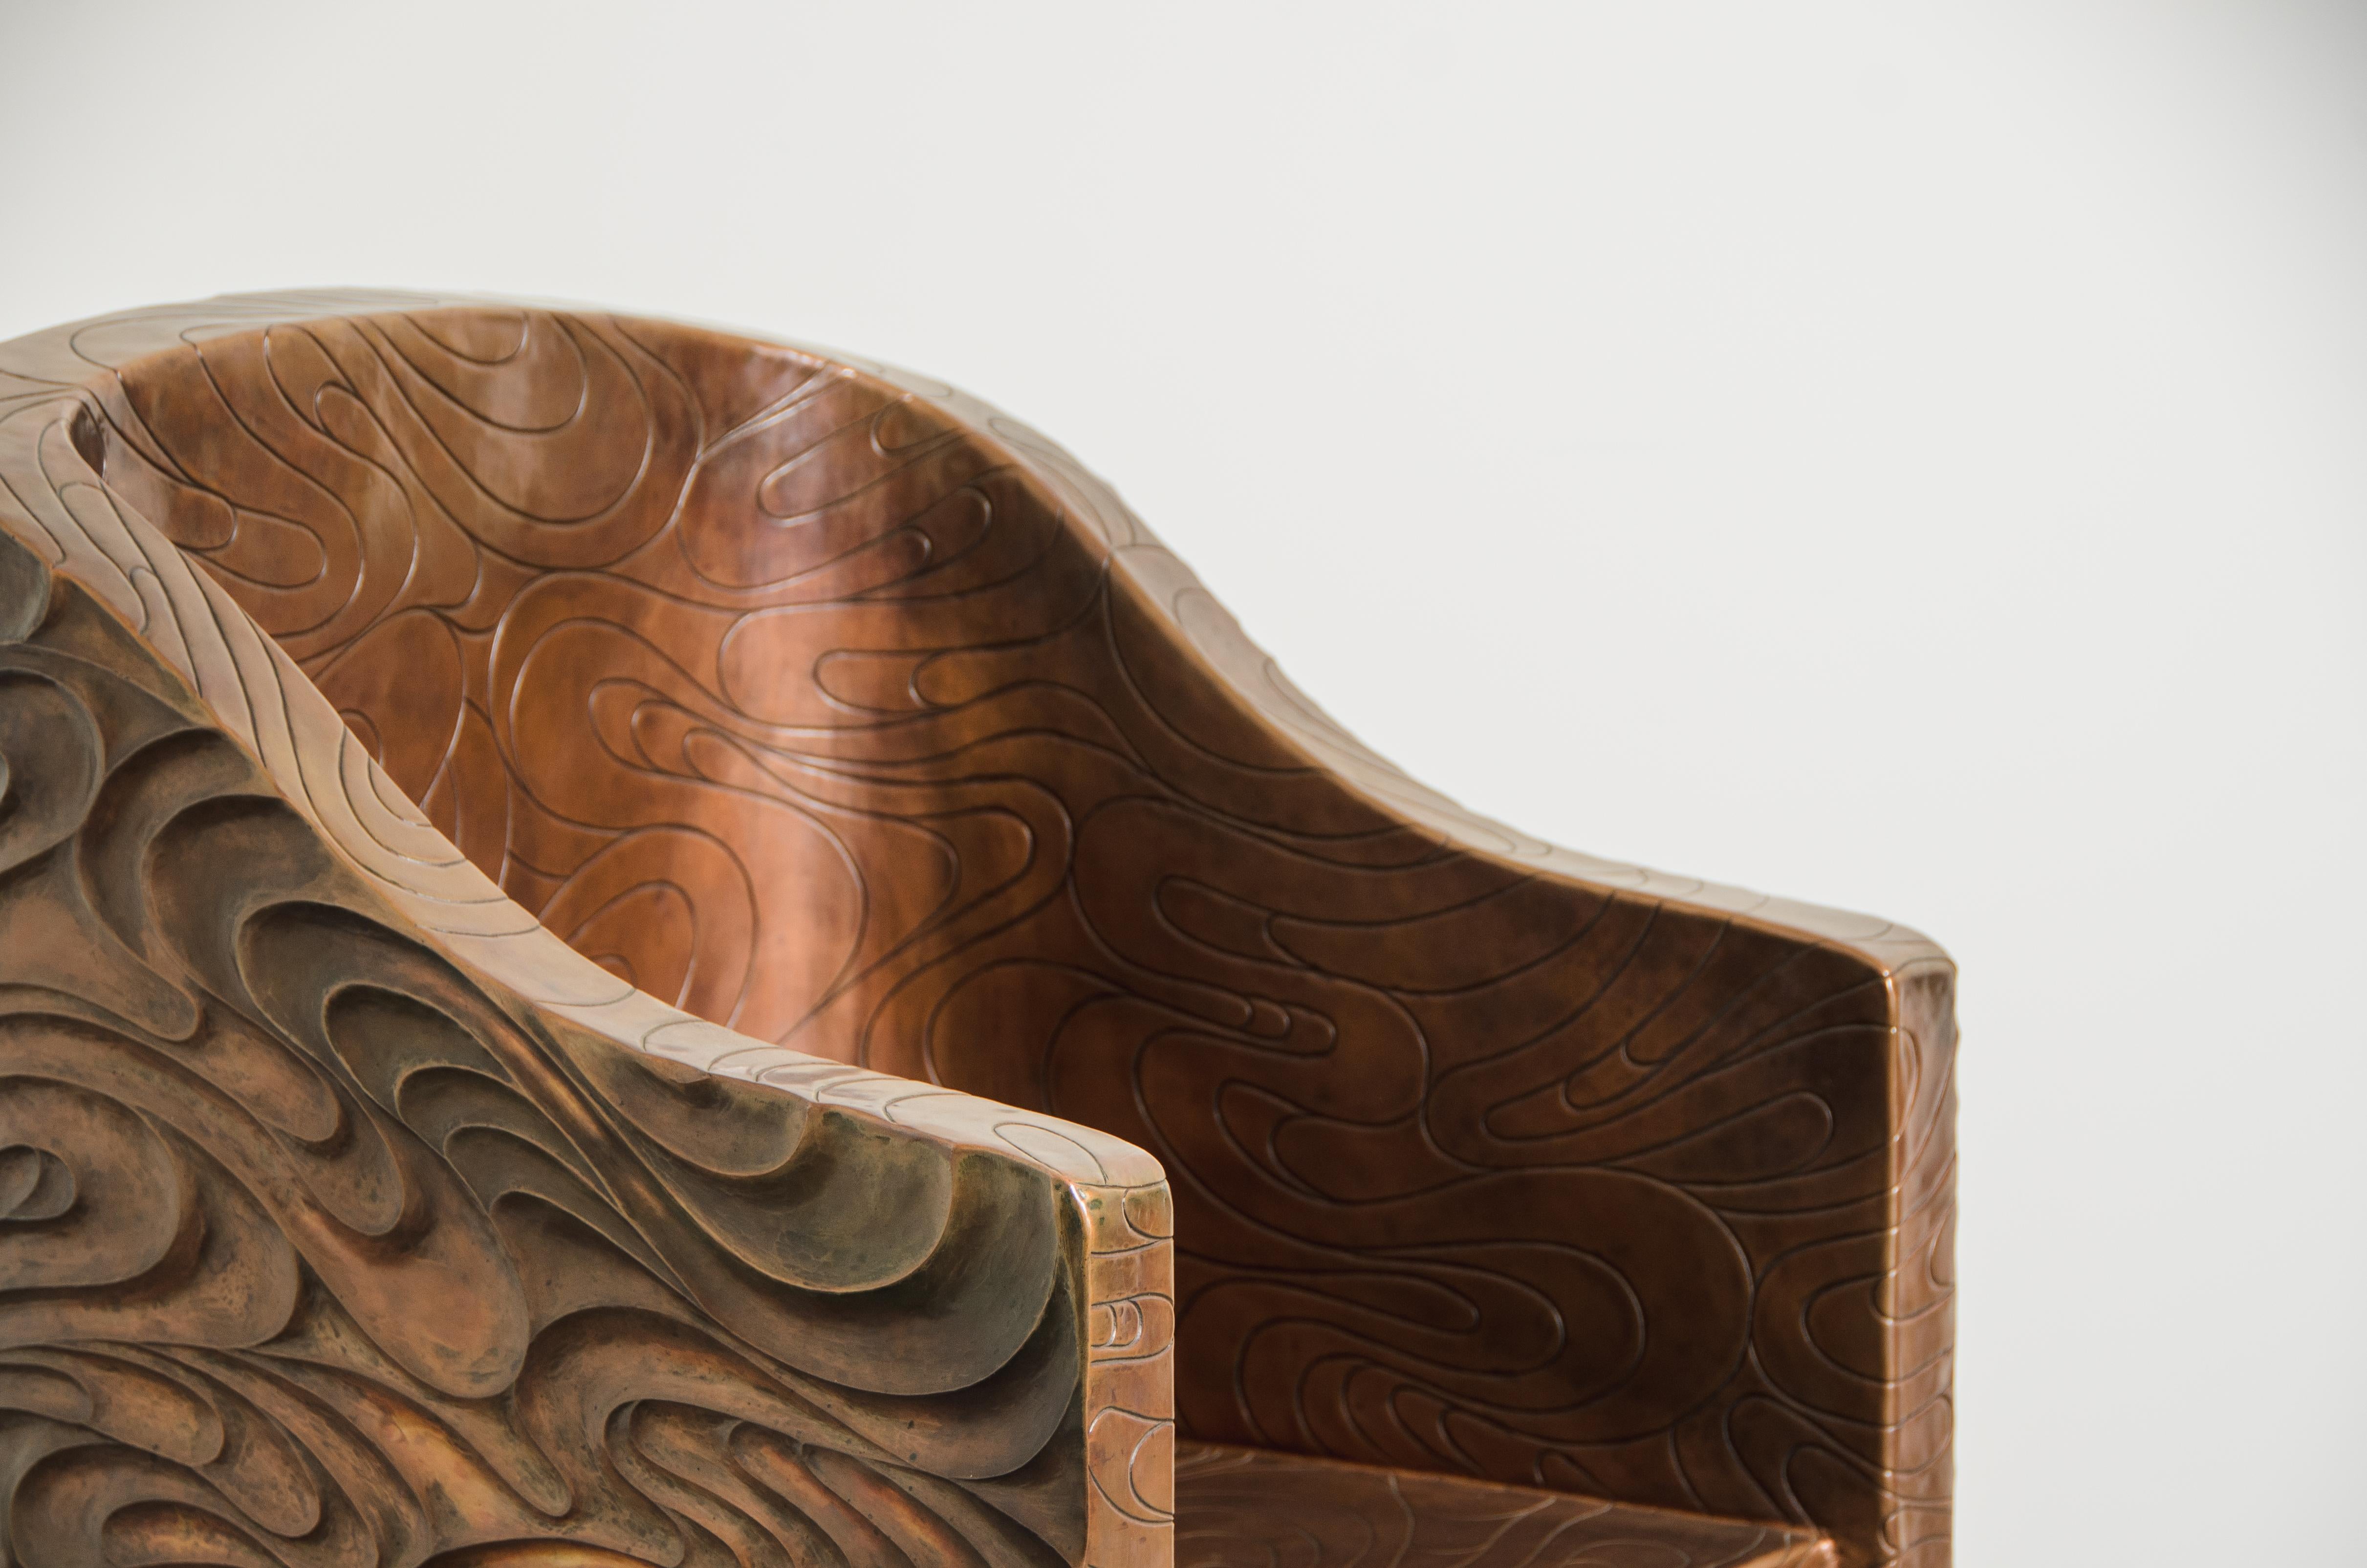 Contemporary Fei Tian Wen Chair in Repoussé Copper by Robert Kuo For Sale 5